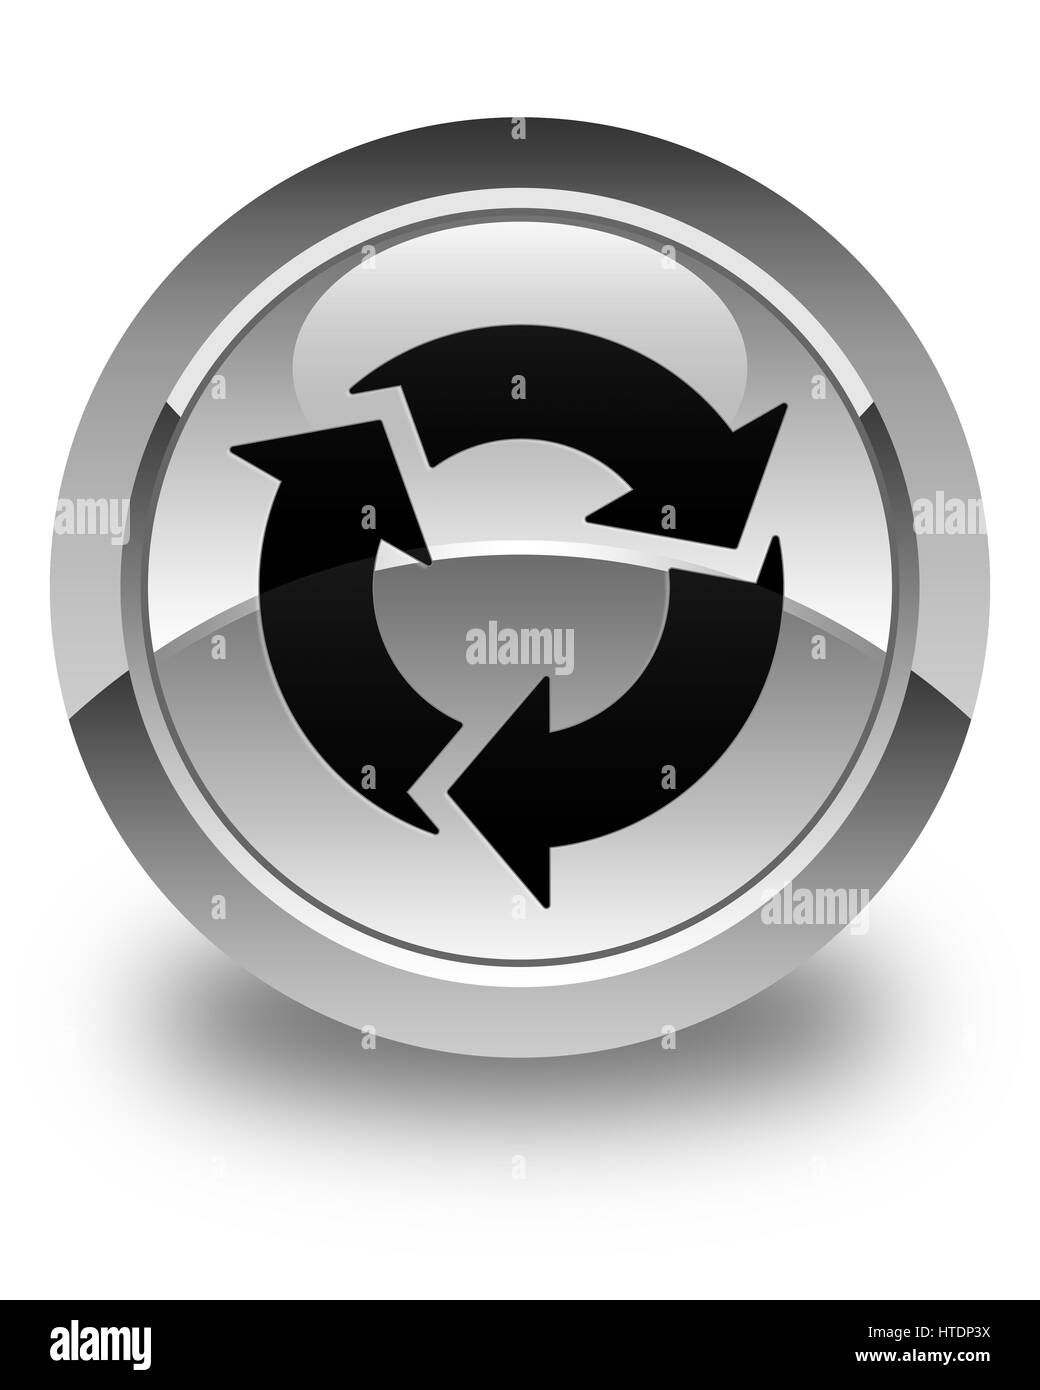 Refresh icon isolated on glossy white round button abstract illustration Stock Photo